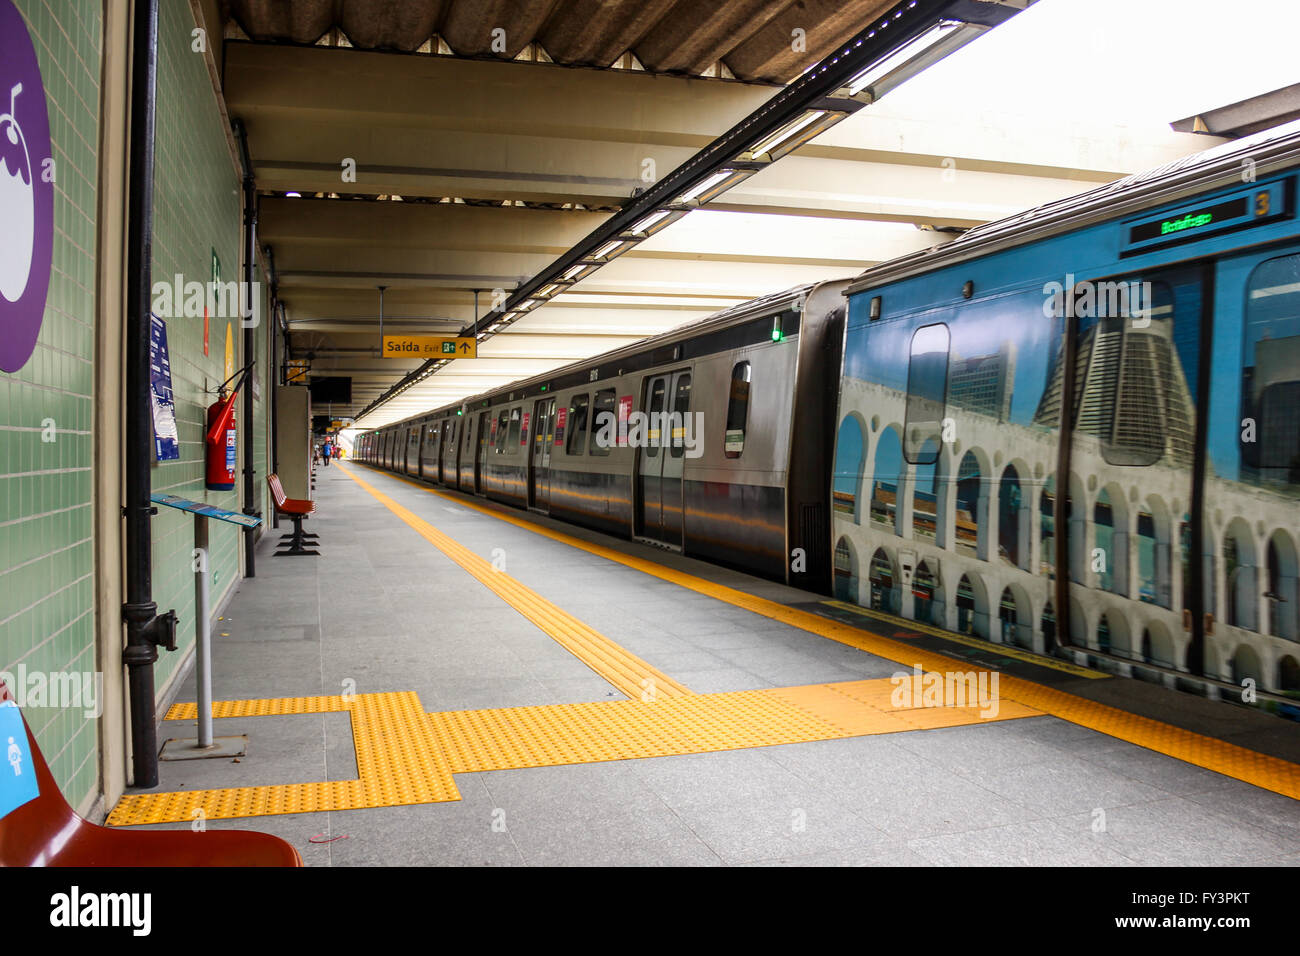 Rio de Janeiro, Brazil: View of public transport in Rio de Janeiro, which will be available for the Olympic Games Rio 2016. The Stock Photo